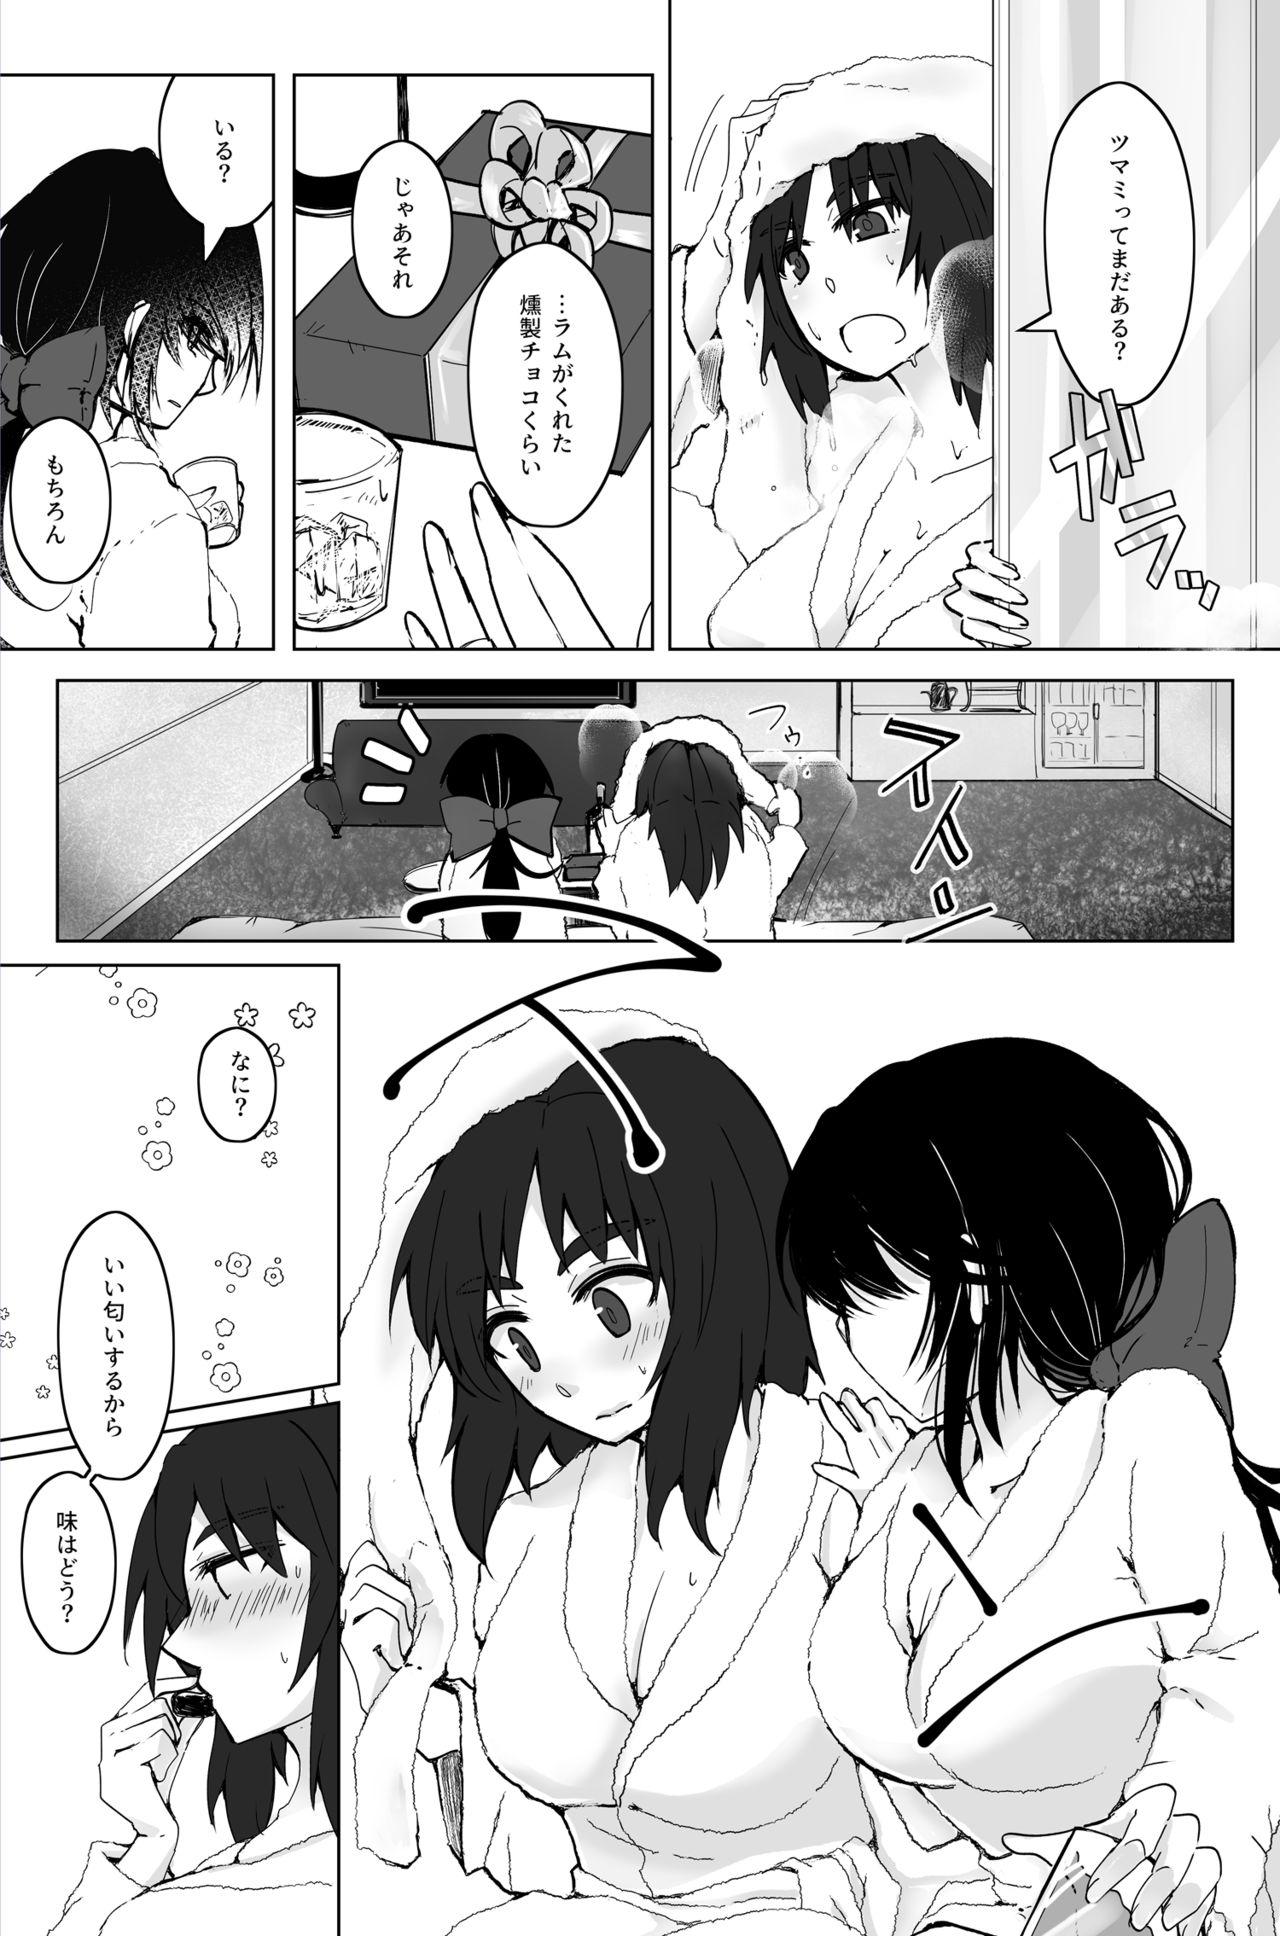 Skype 新婚ムラ銀で初夜の話 - Girls und panzer Old Vs Young - Page 3